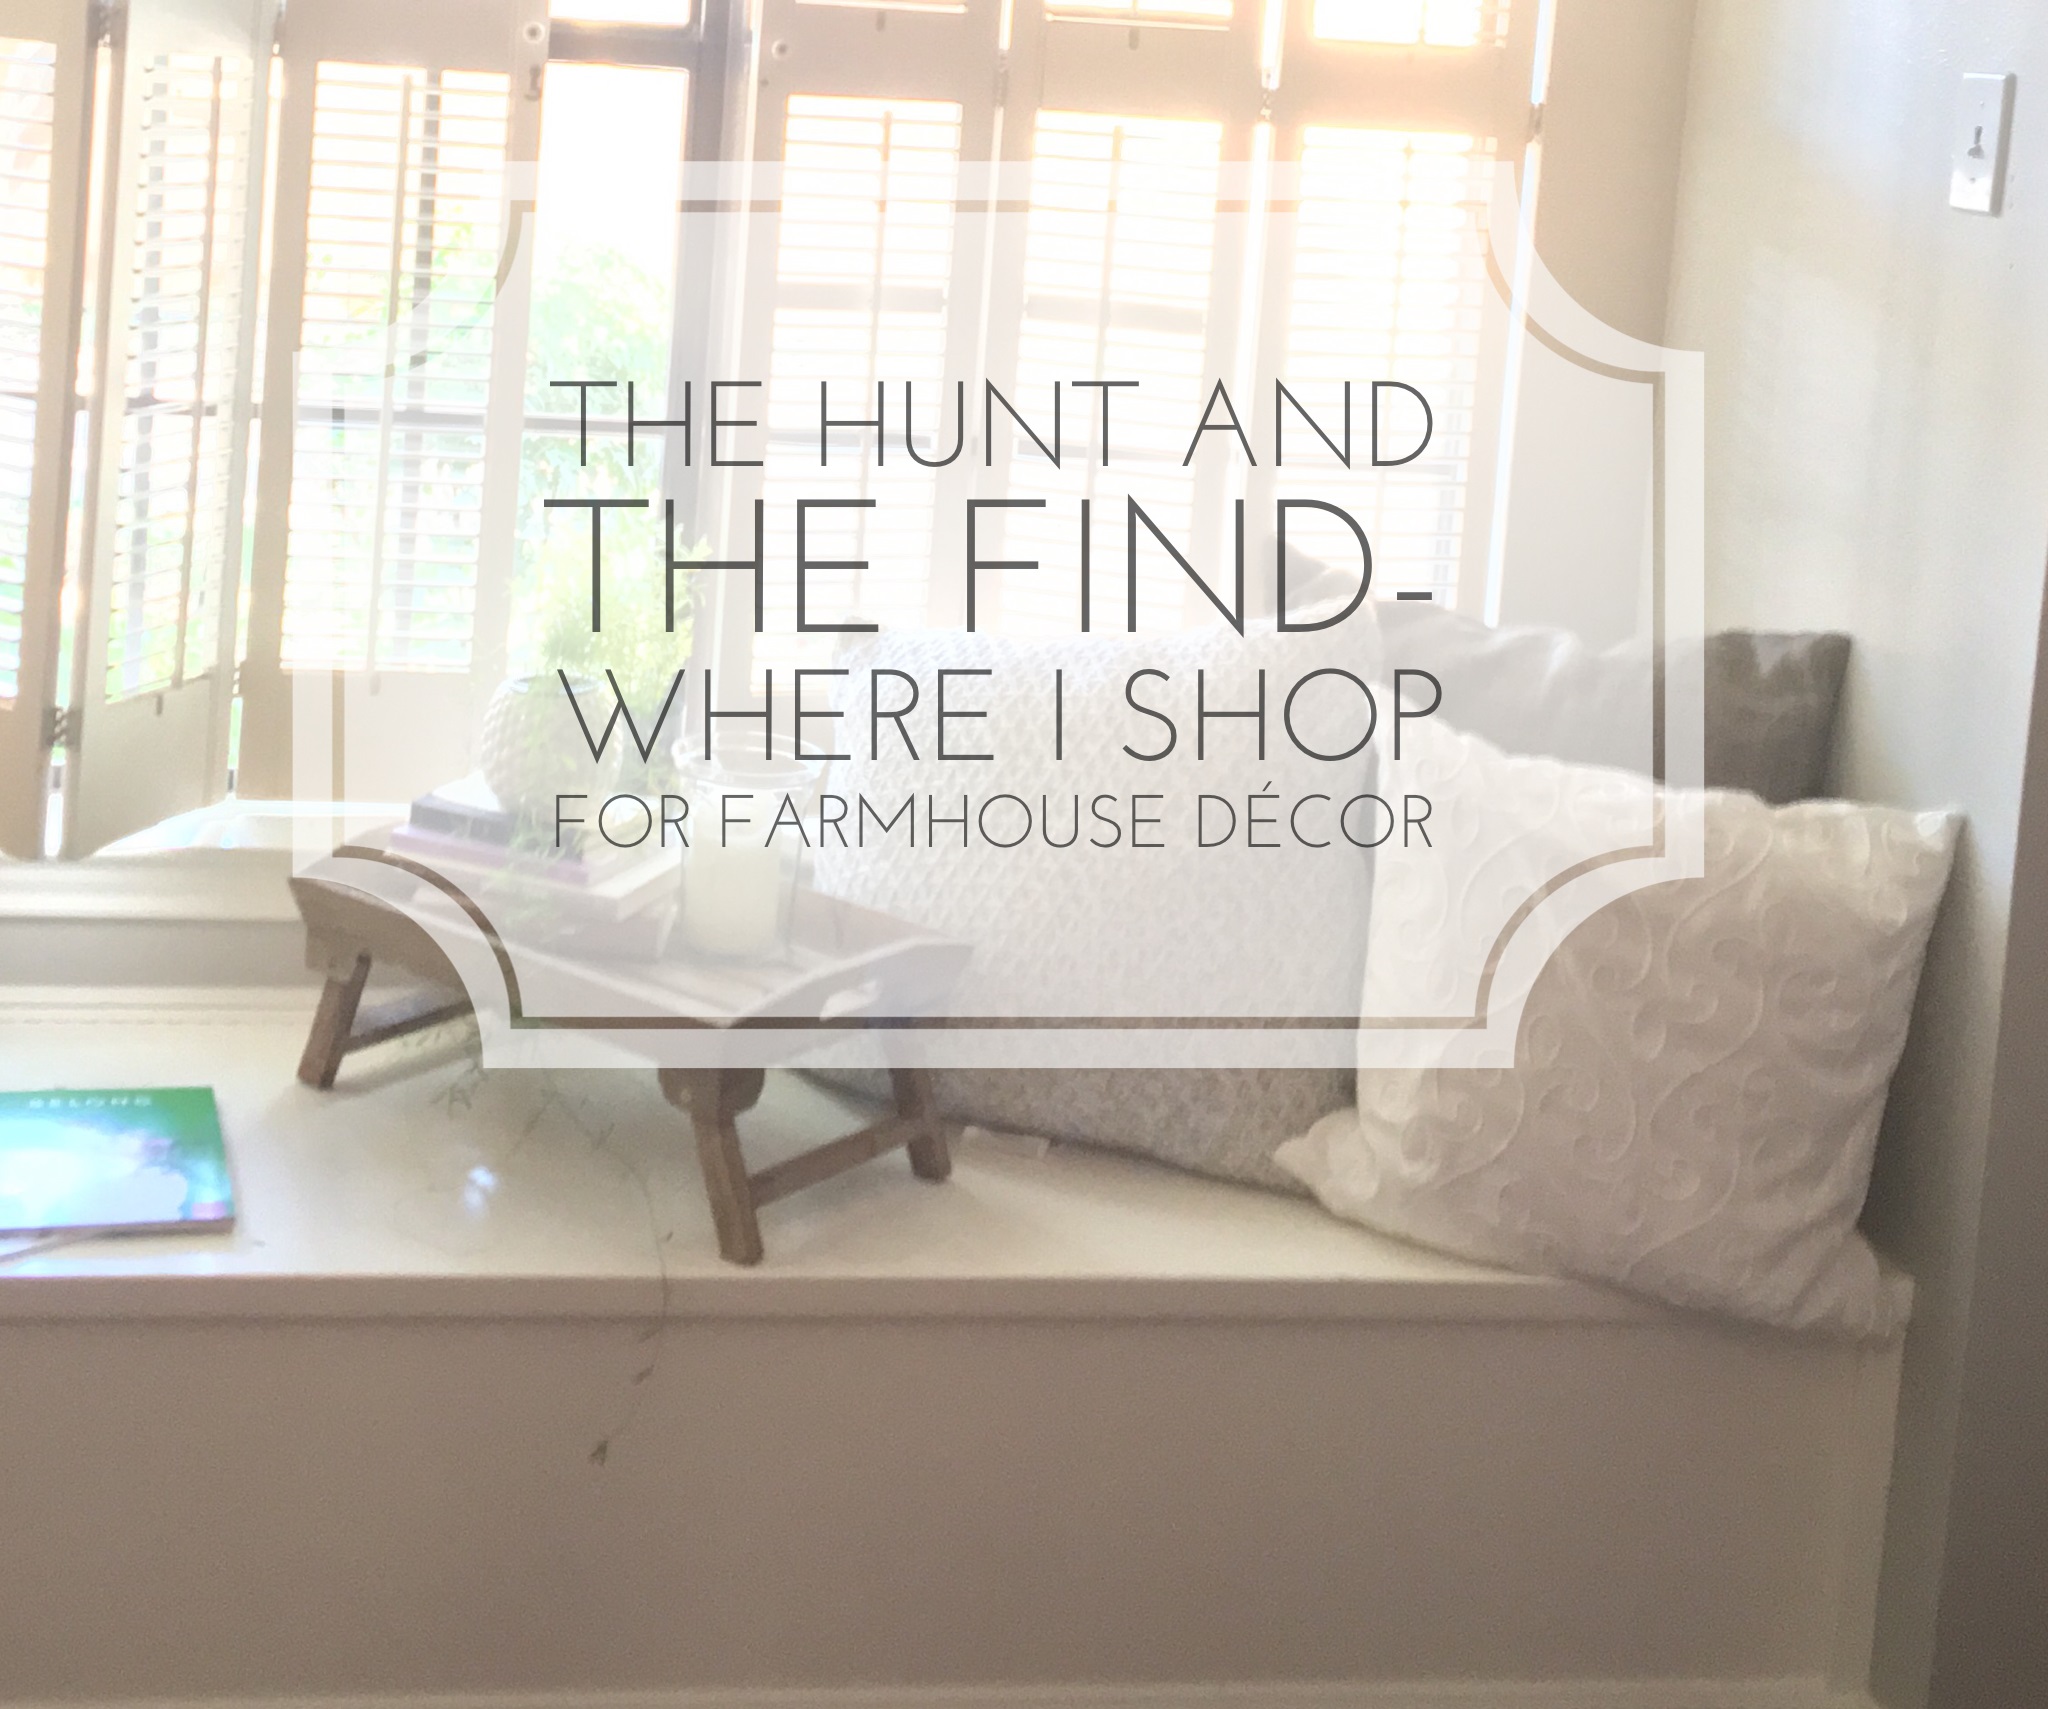 The Hunt and the Find-where I shop for farmhouse decor